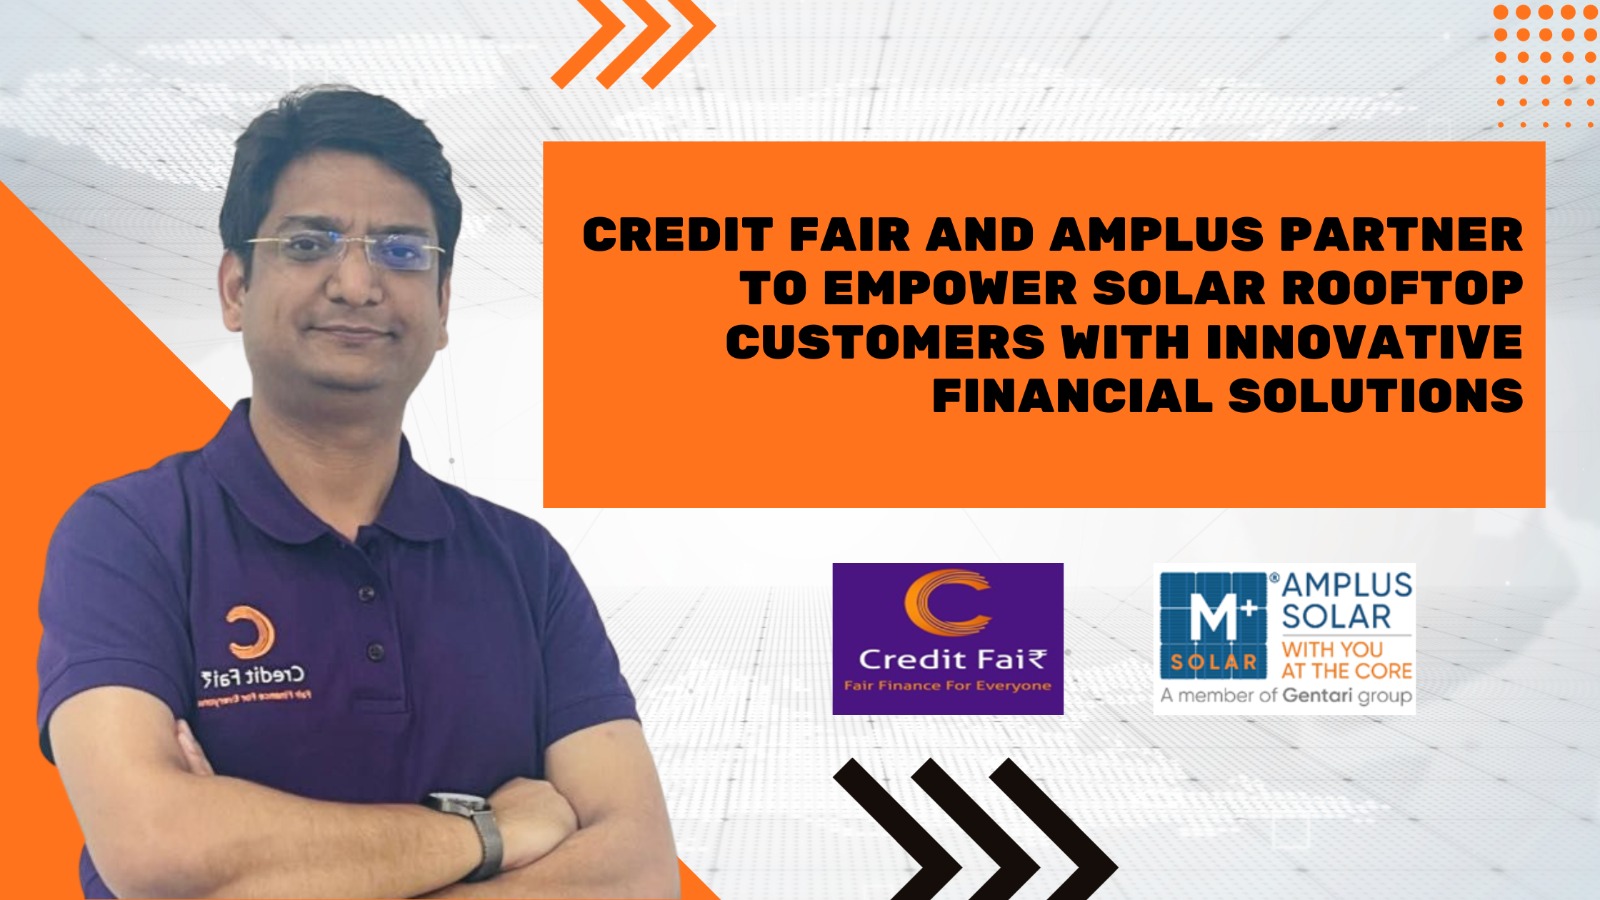 Credit Fair joins hands with Amplus to offer easy financial solutions to solar rooftop customers